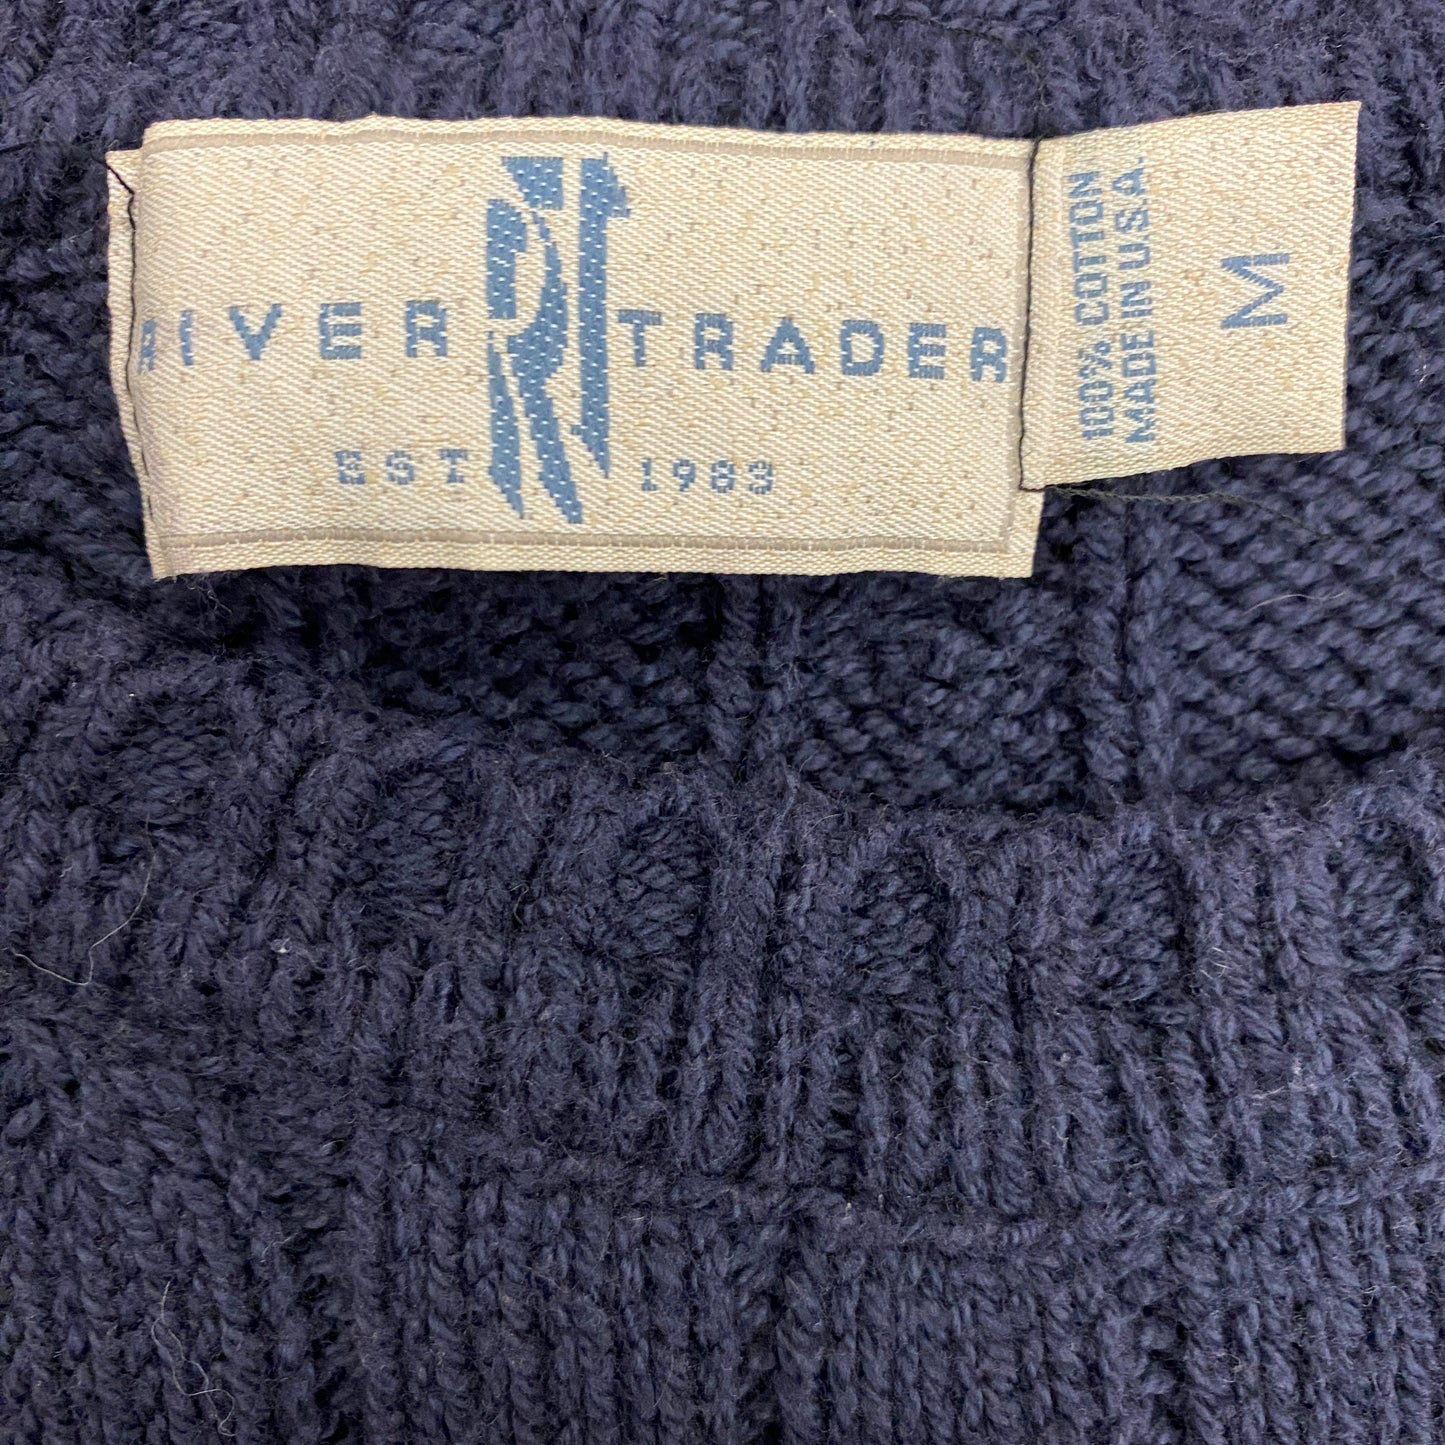 1990s River Trader Cable Knit Navy Blue Sweater - Size Medium